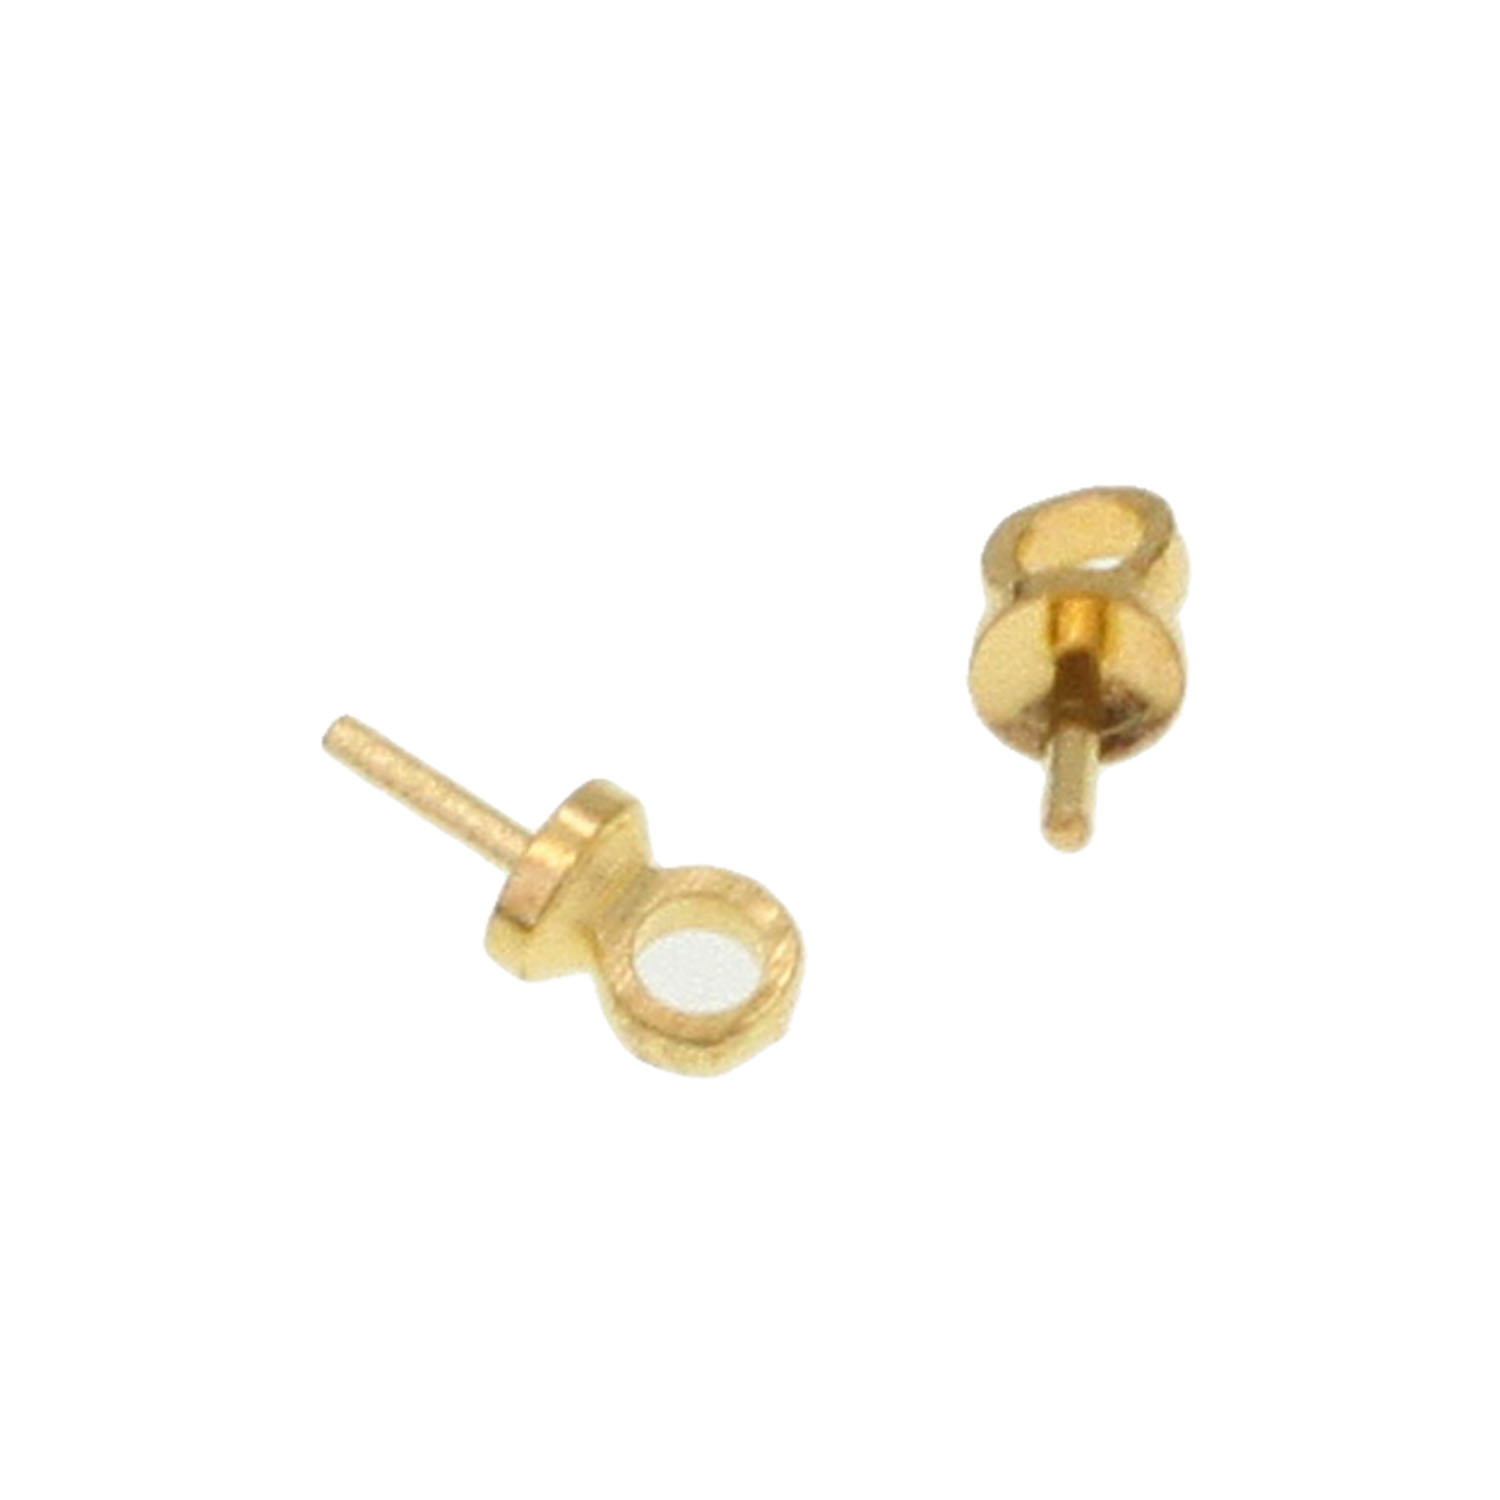 Gold 5mm pack of 2000